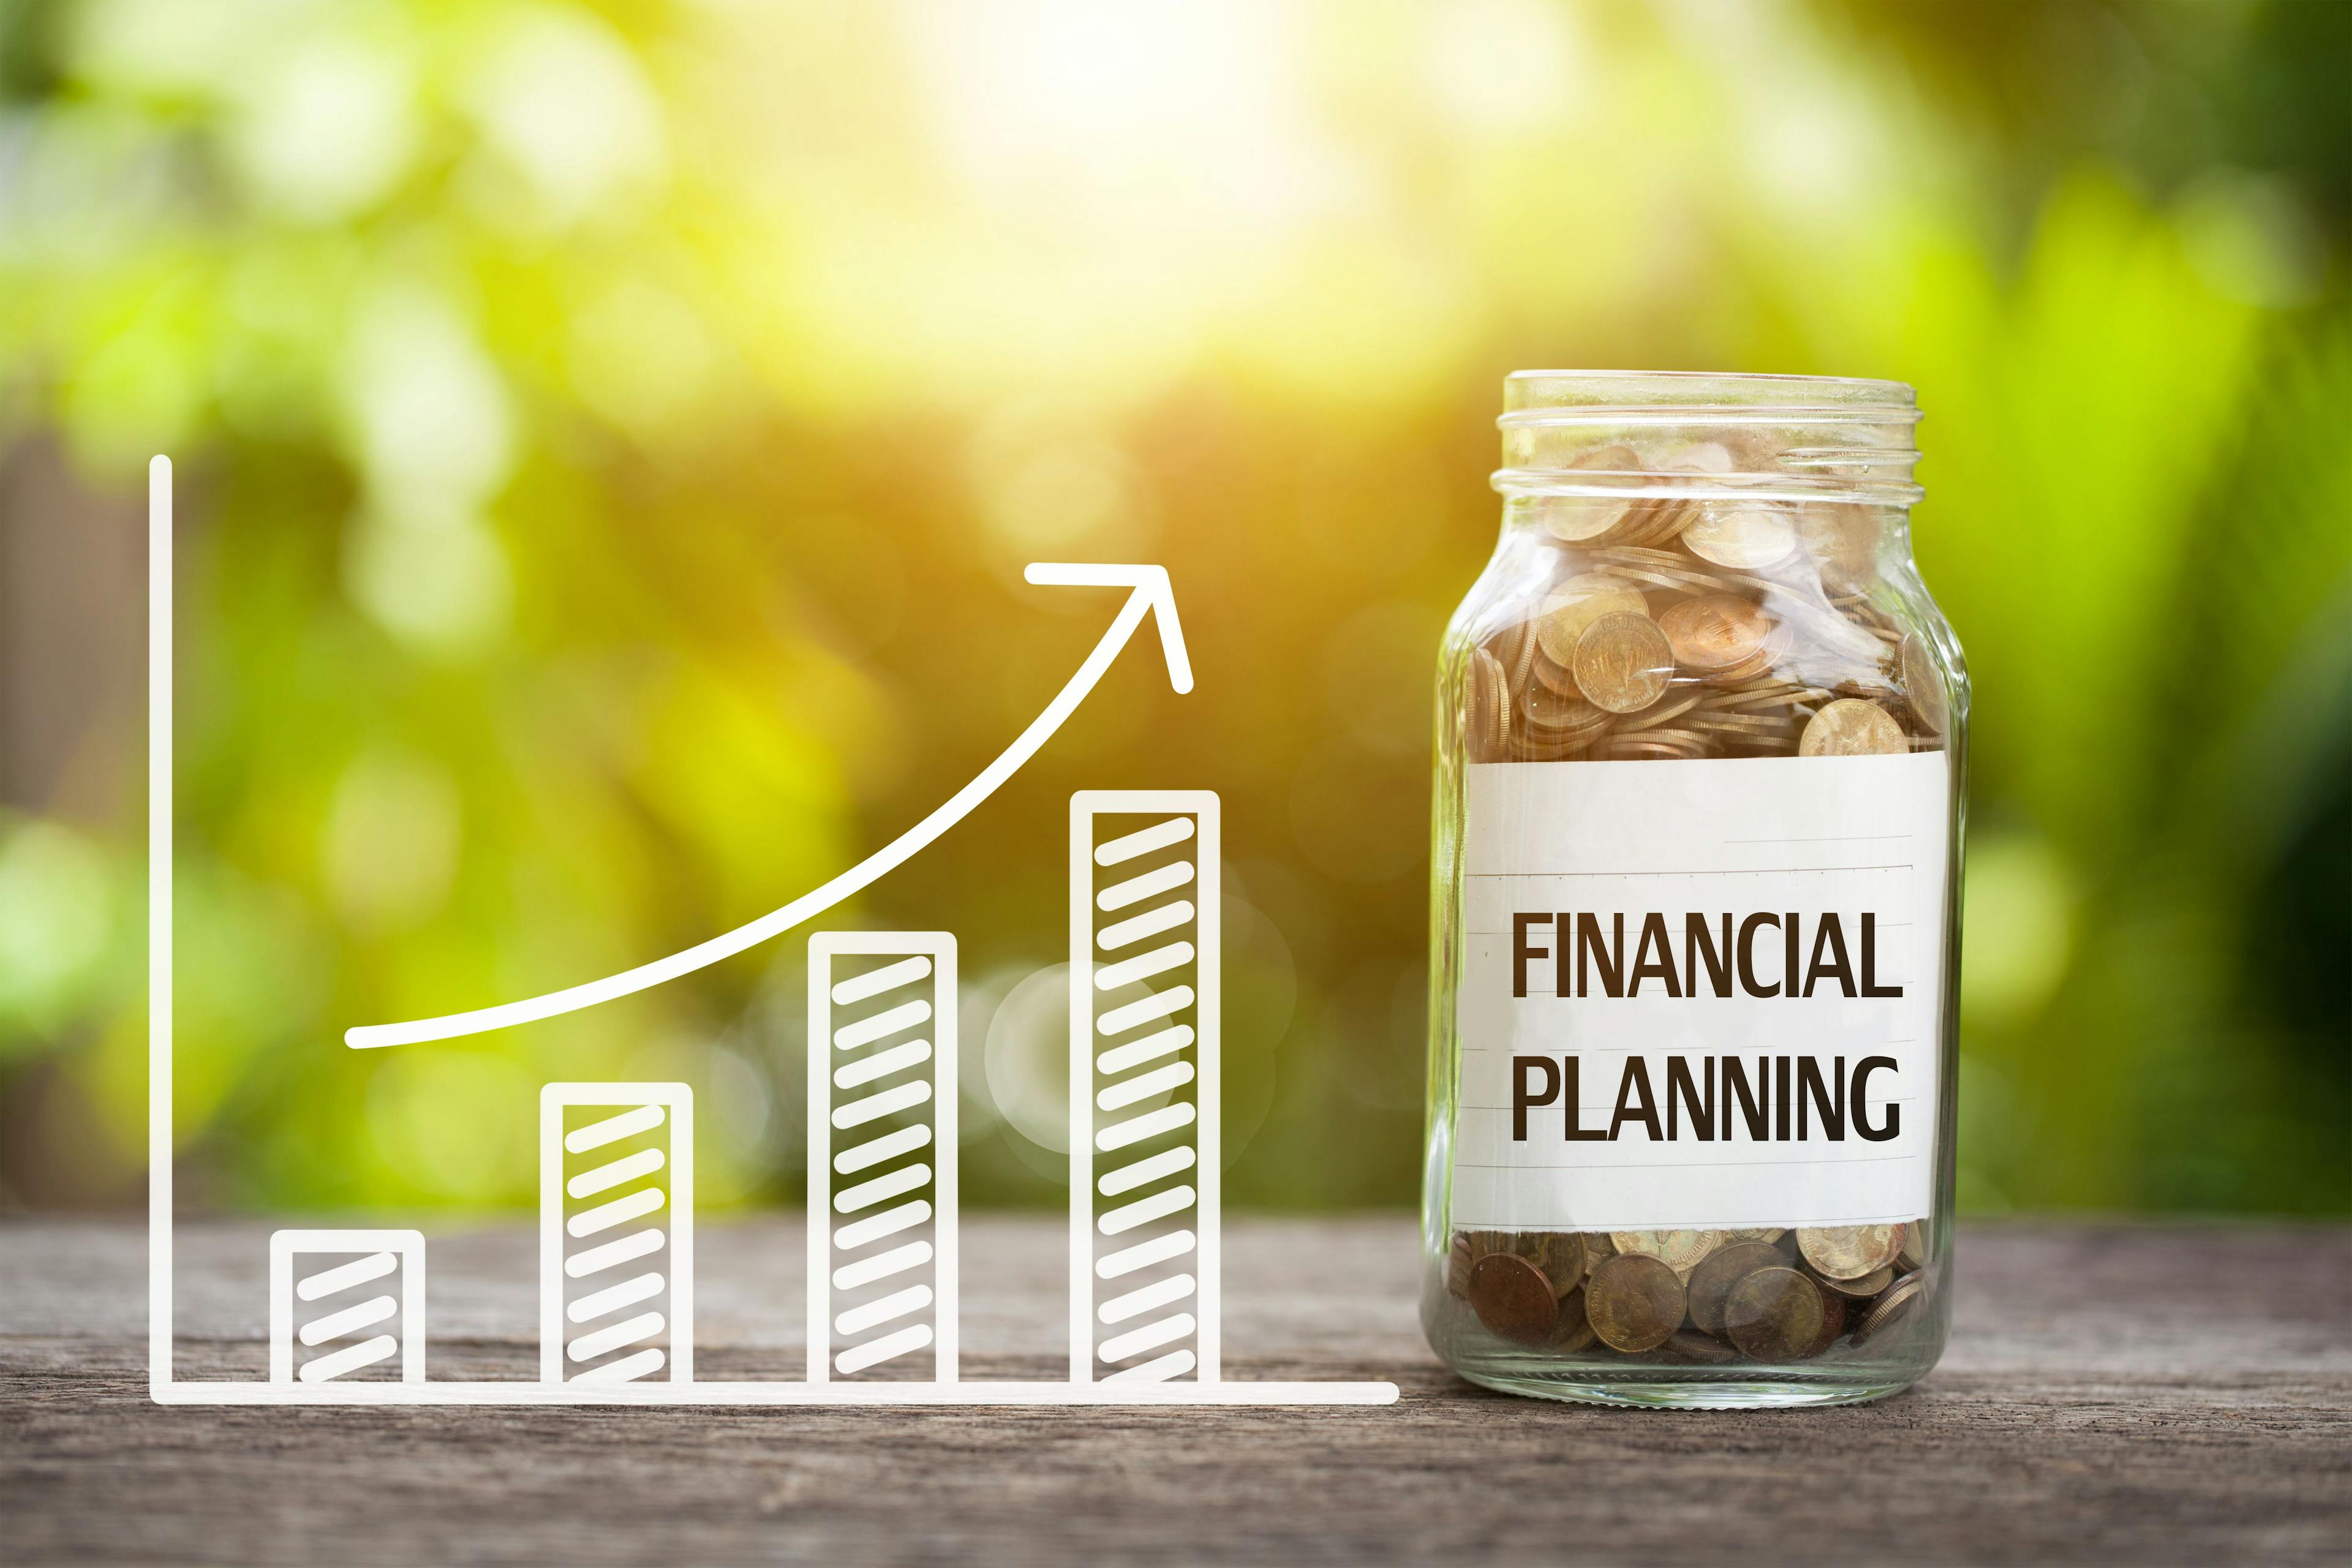 Financial planning in jar and chart